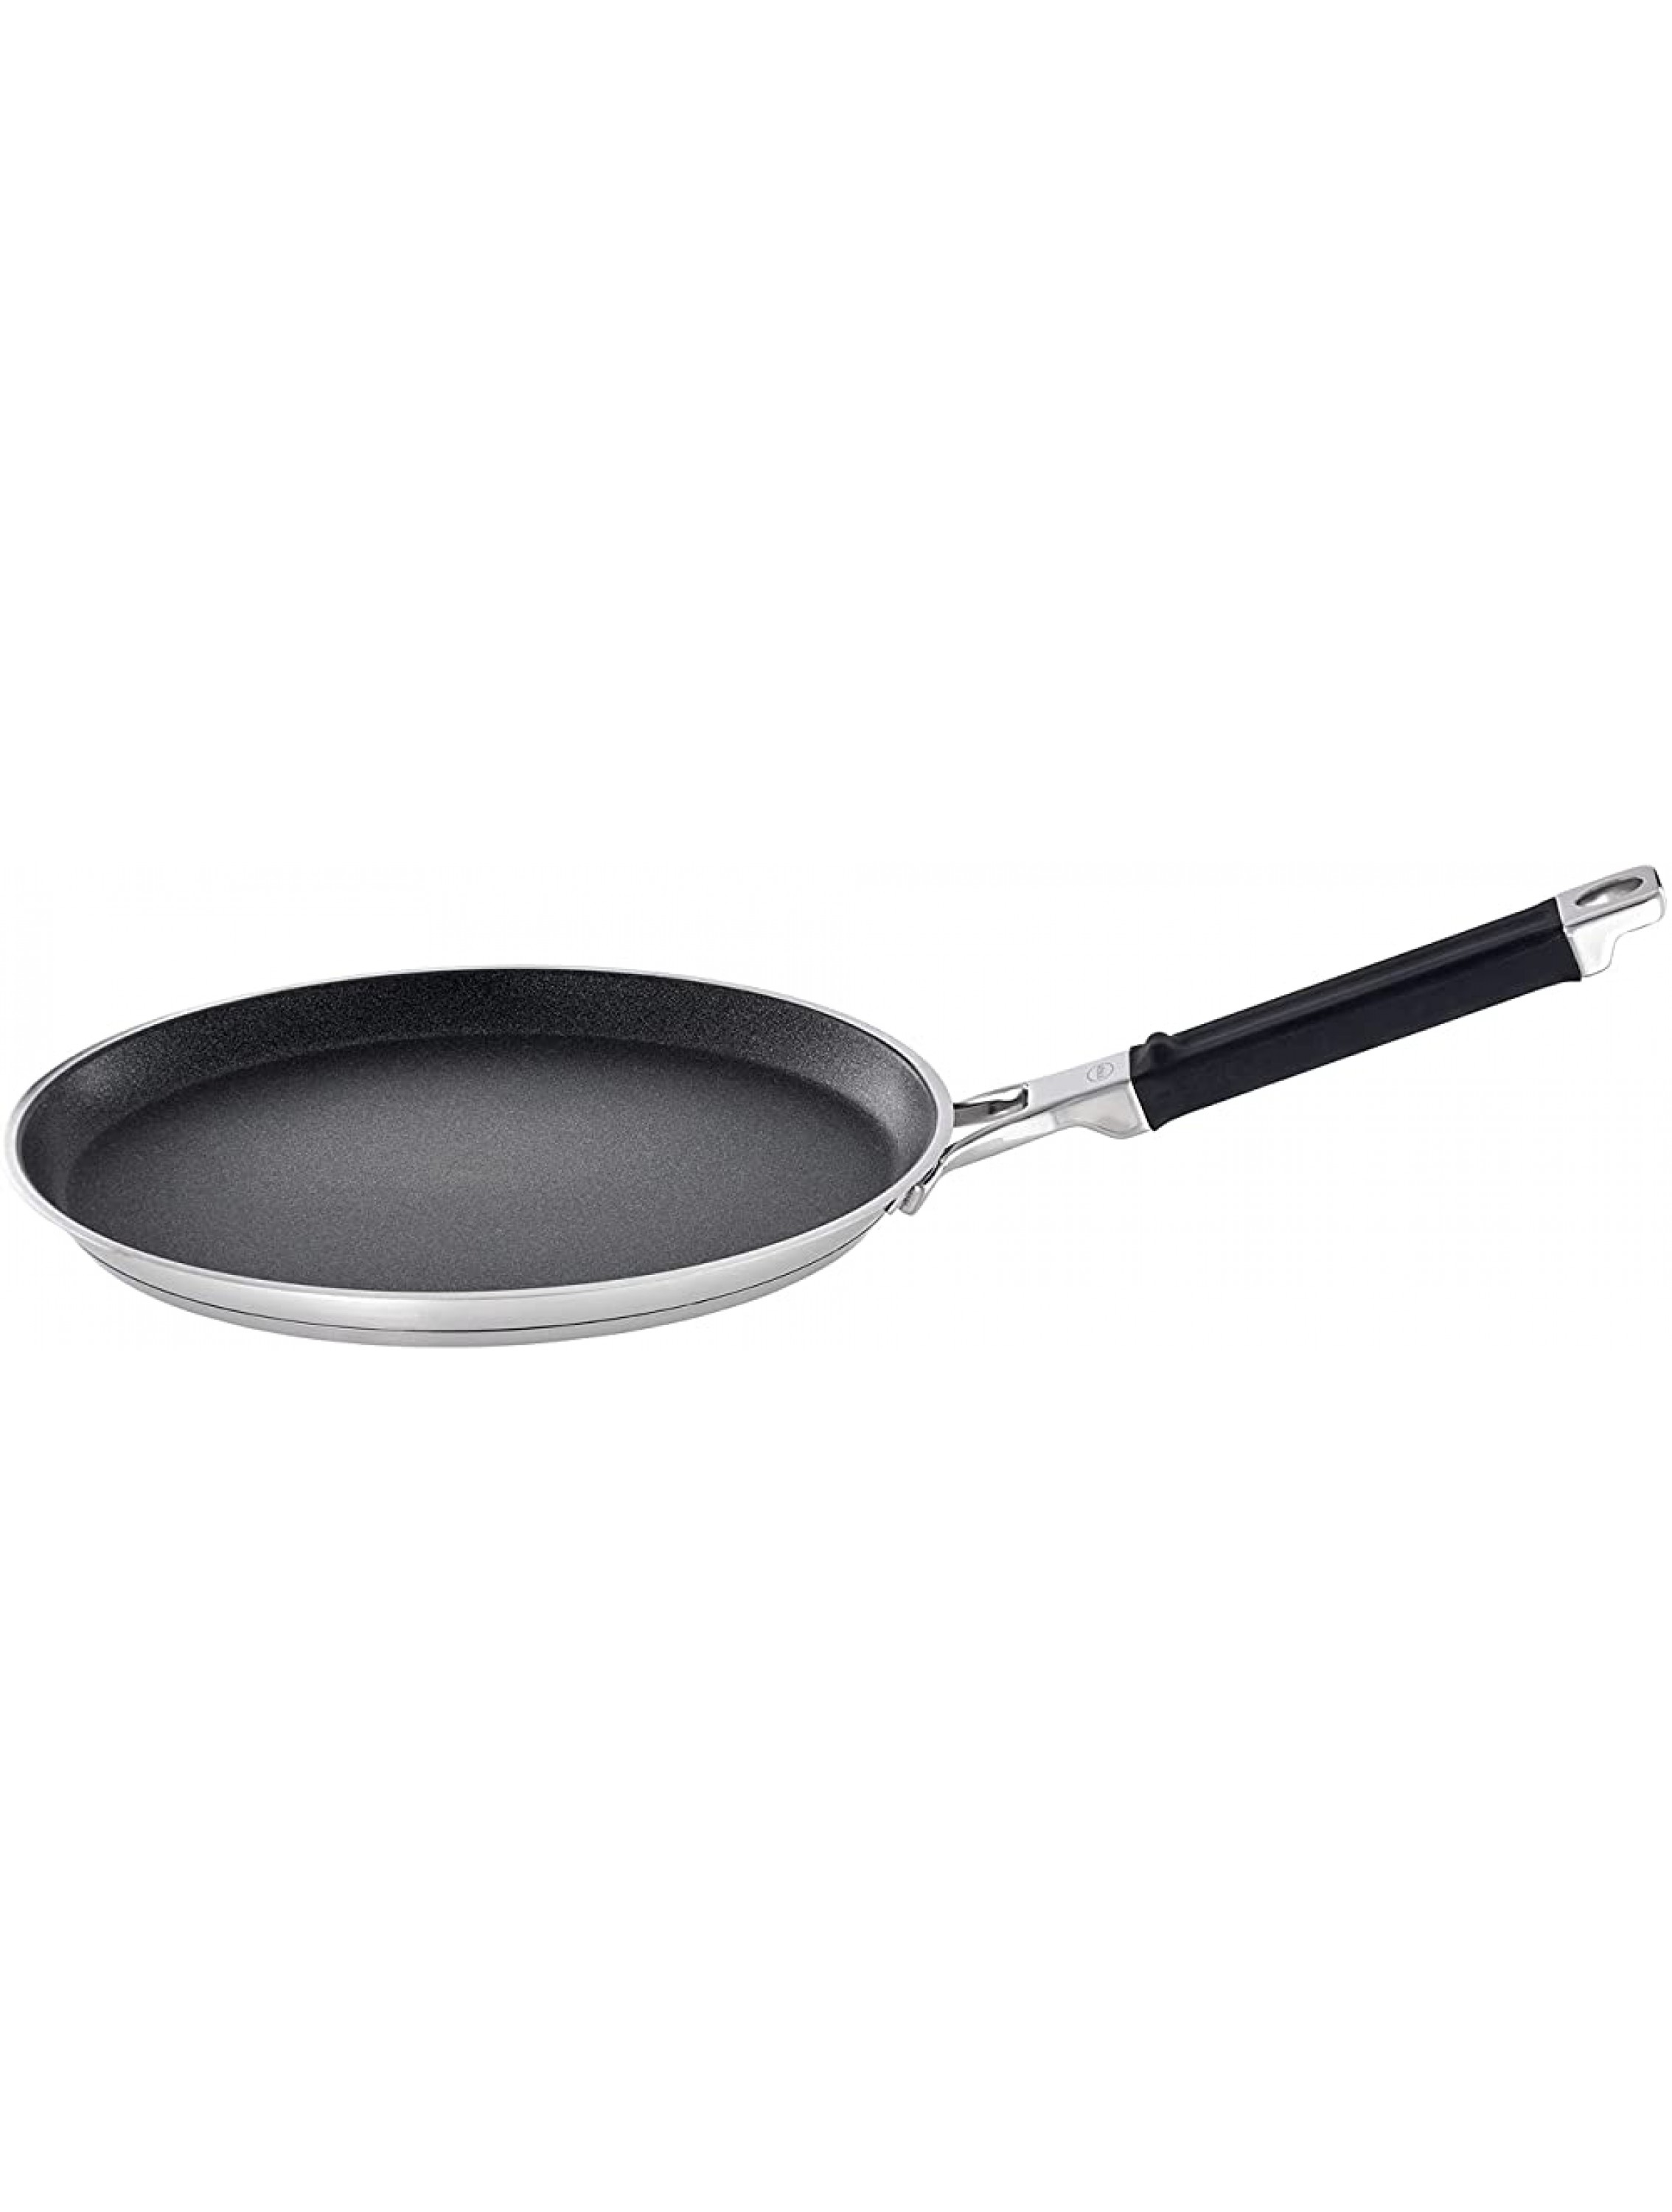 Rösle SILENCE PRO Cookware Collection 11 in. Crepes Pan with Non-Stick Coating - BTQPKQJL7